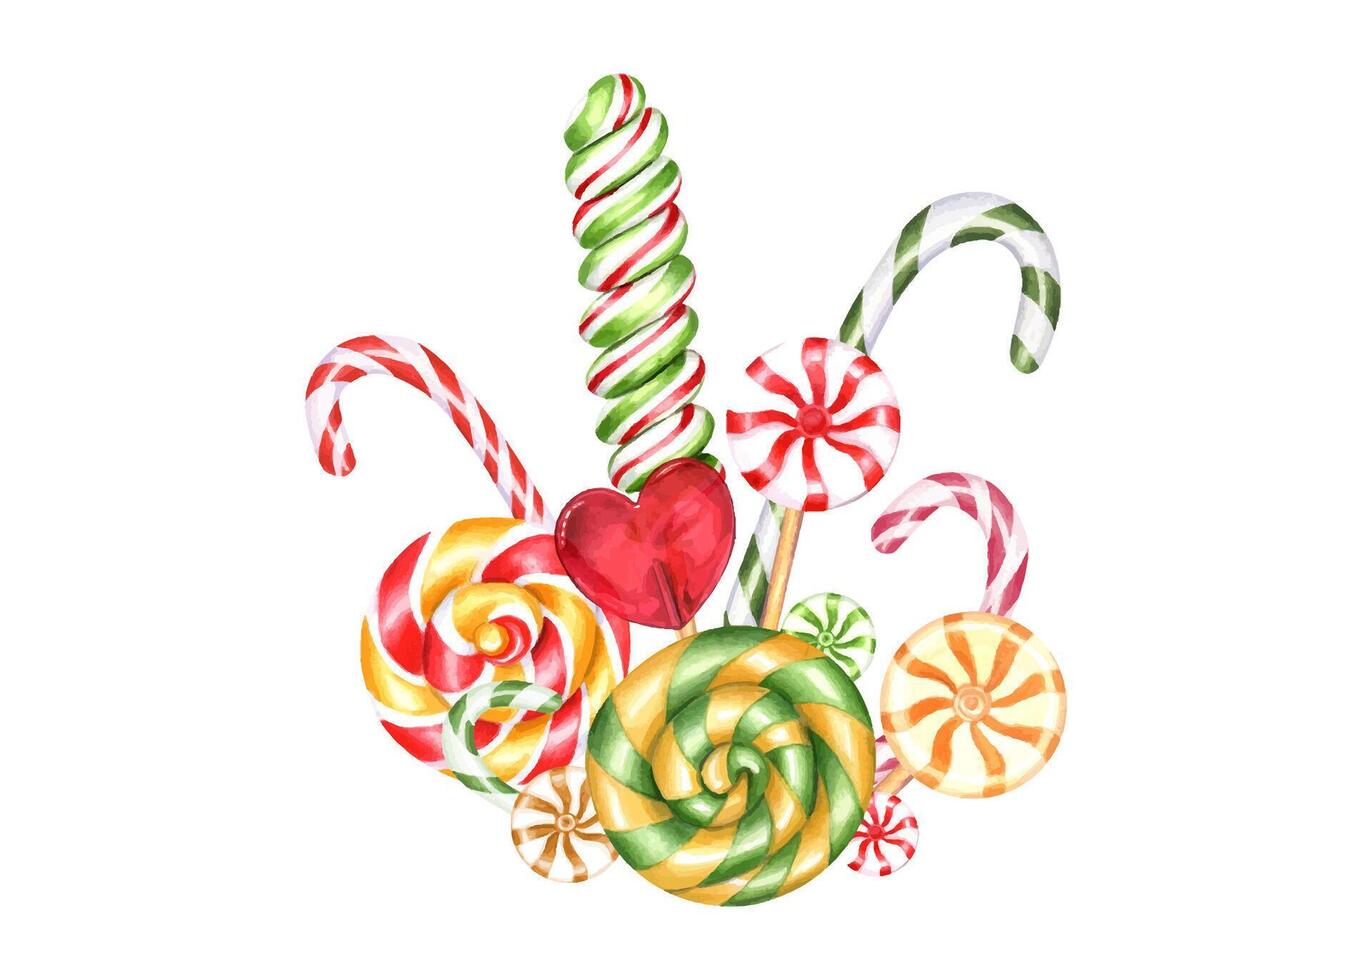 Candy bouquet. Candy cane, spiral caramels, heart shape lollipop and bonbons with striped swirls. Sweetness multicolored dessert of various shape and taste. Watercolor illustration for gift decor vector